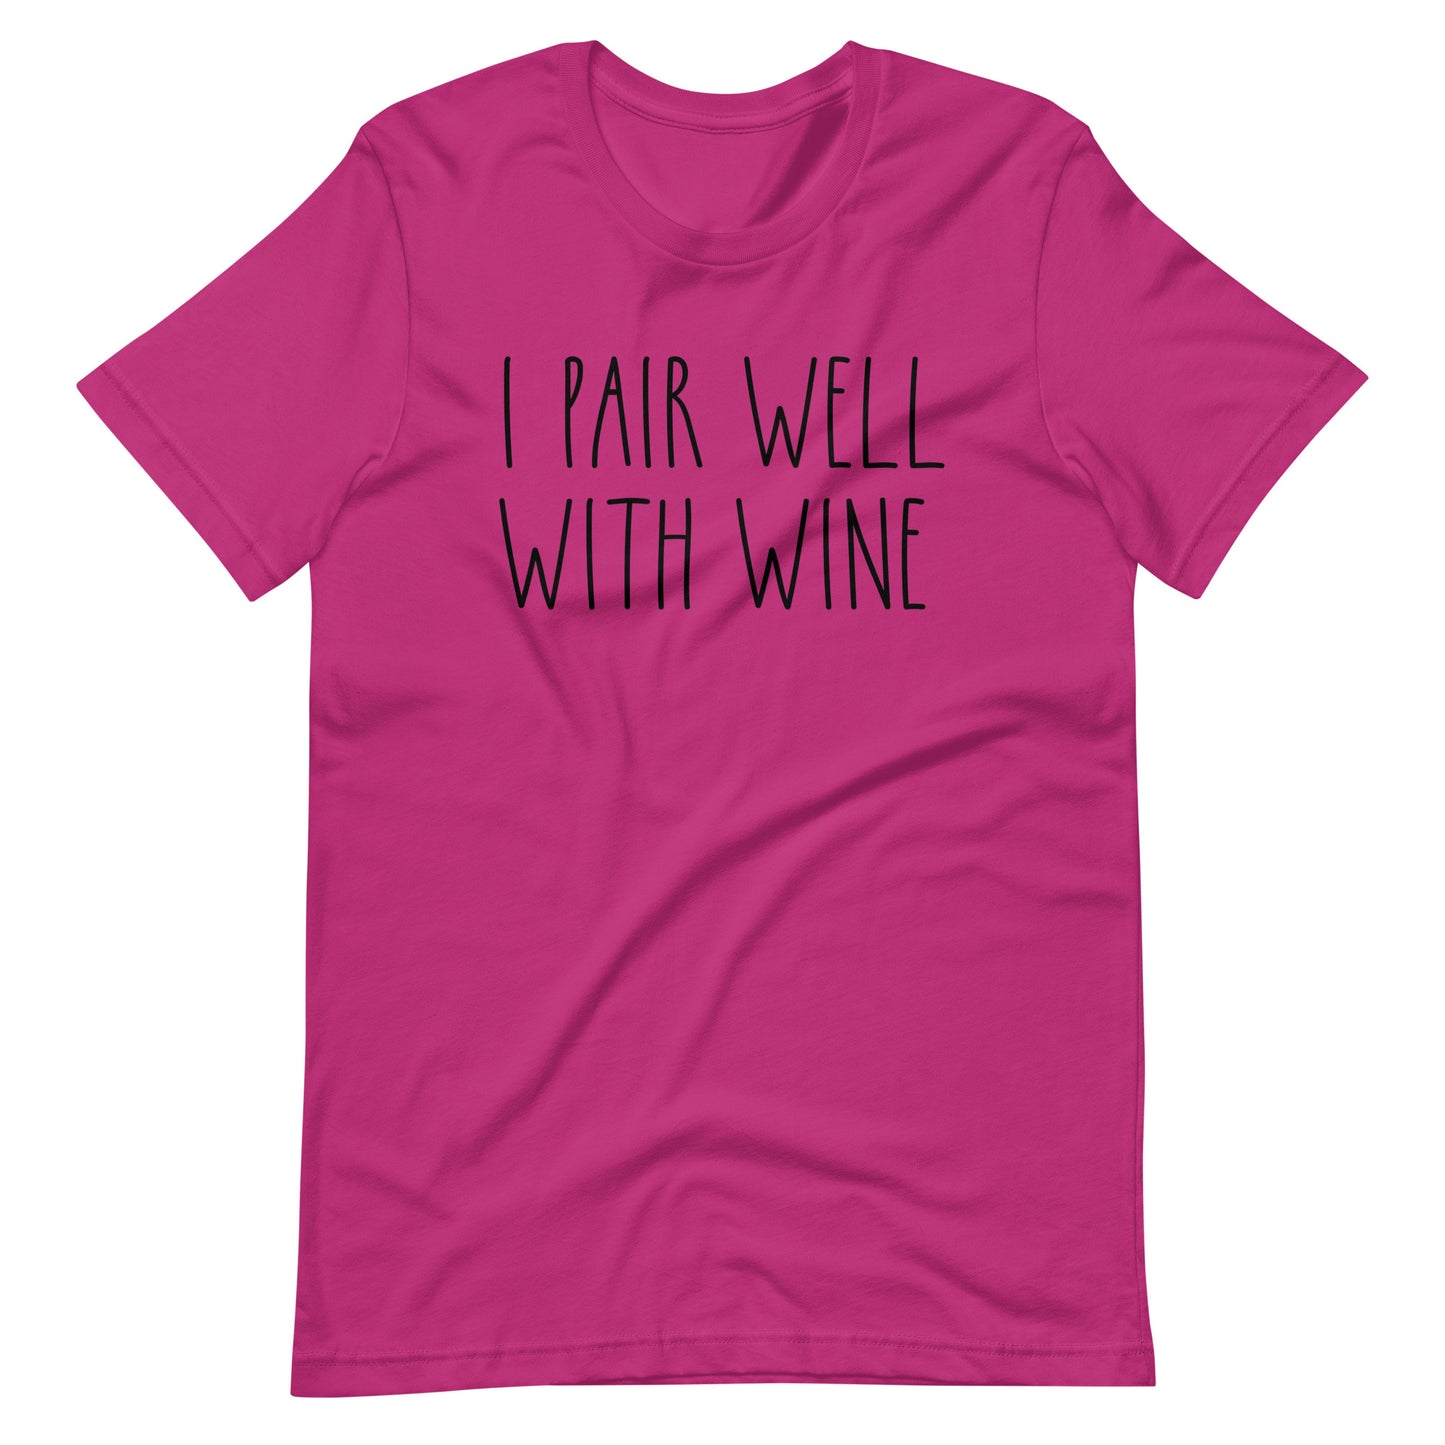 I PAIR WELL WITH WINE